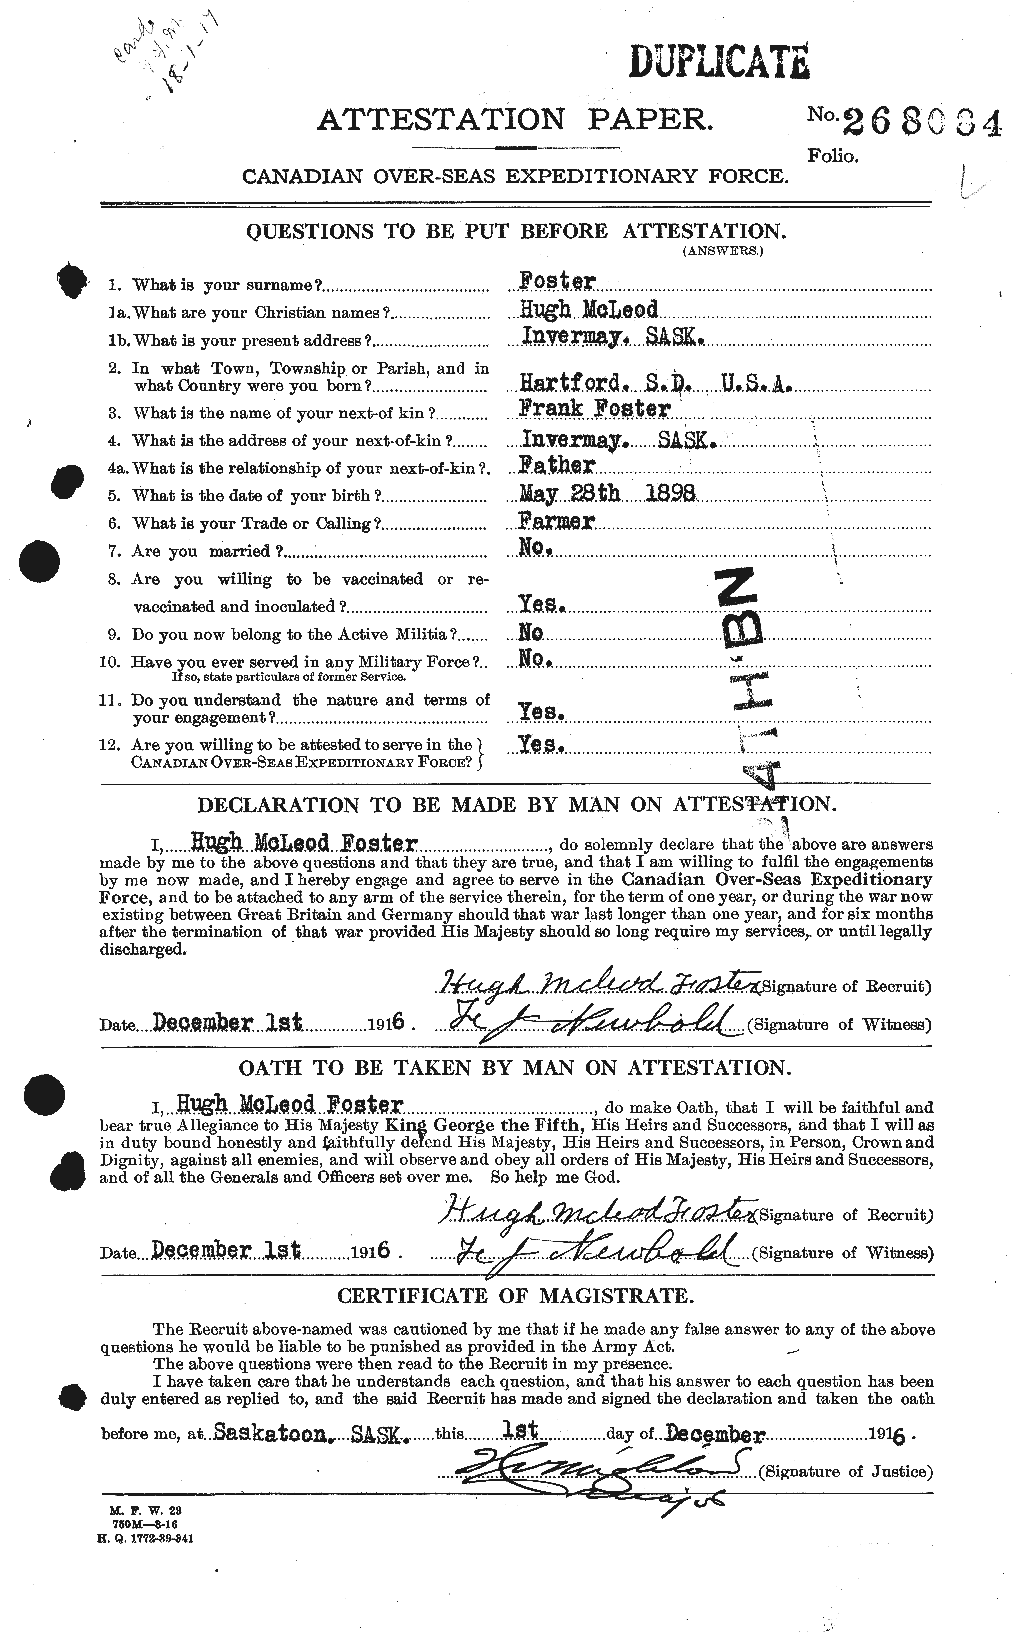 Personnel Records of the First World War - CEF 333268a